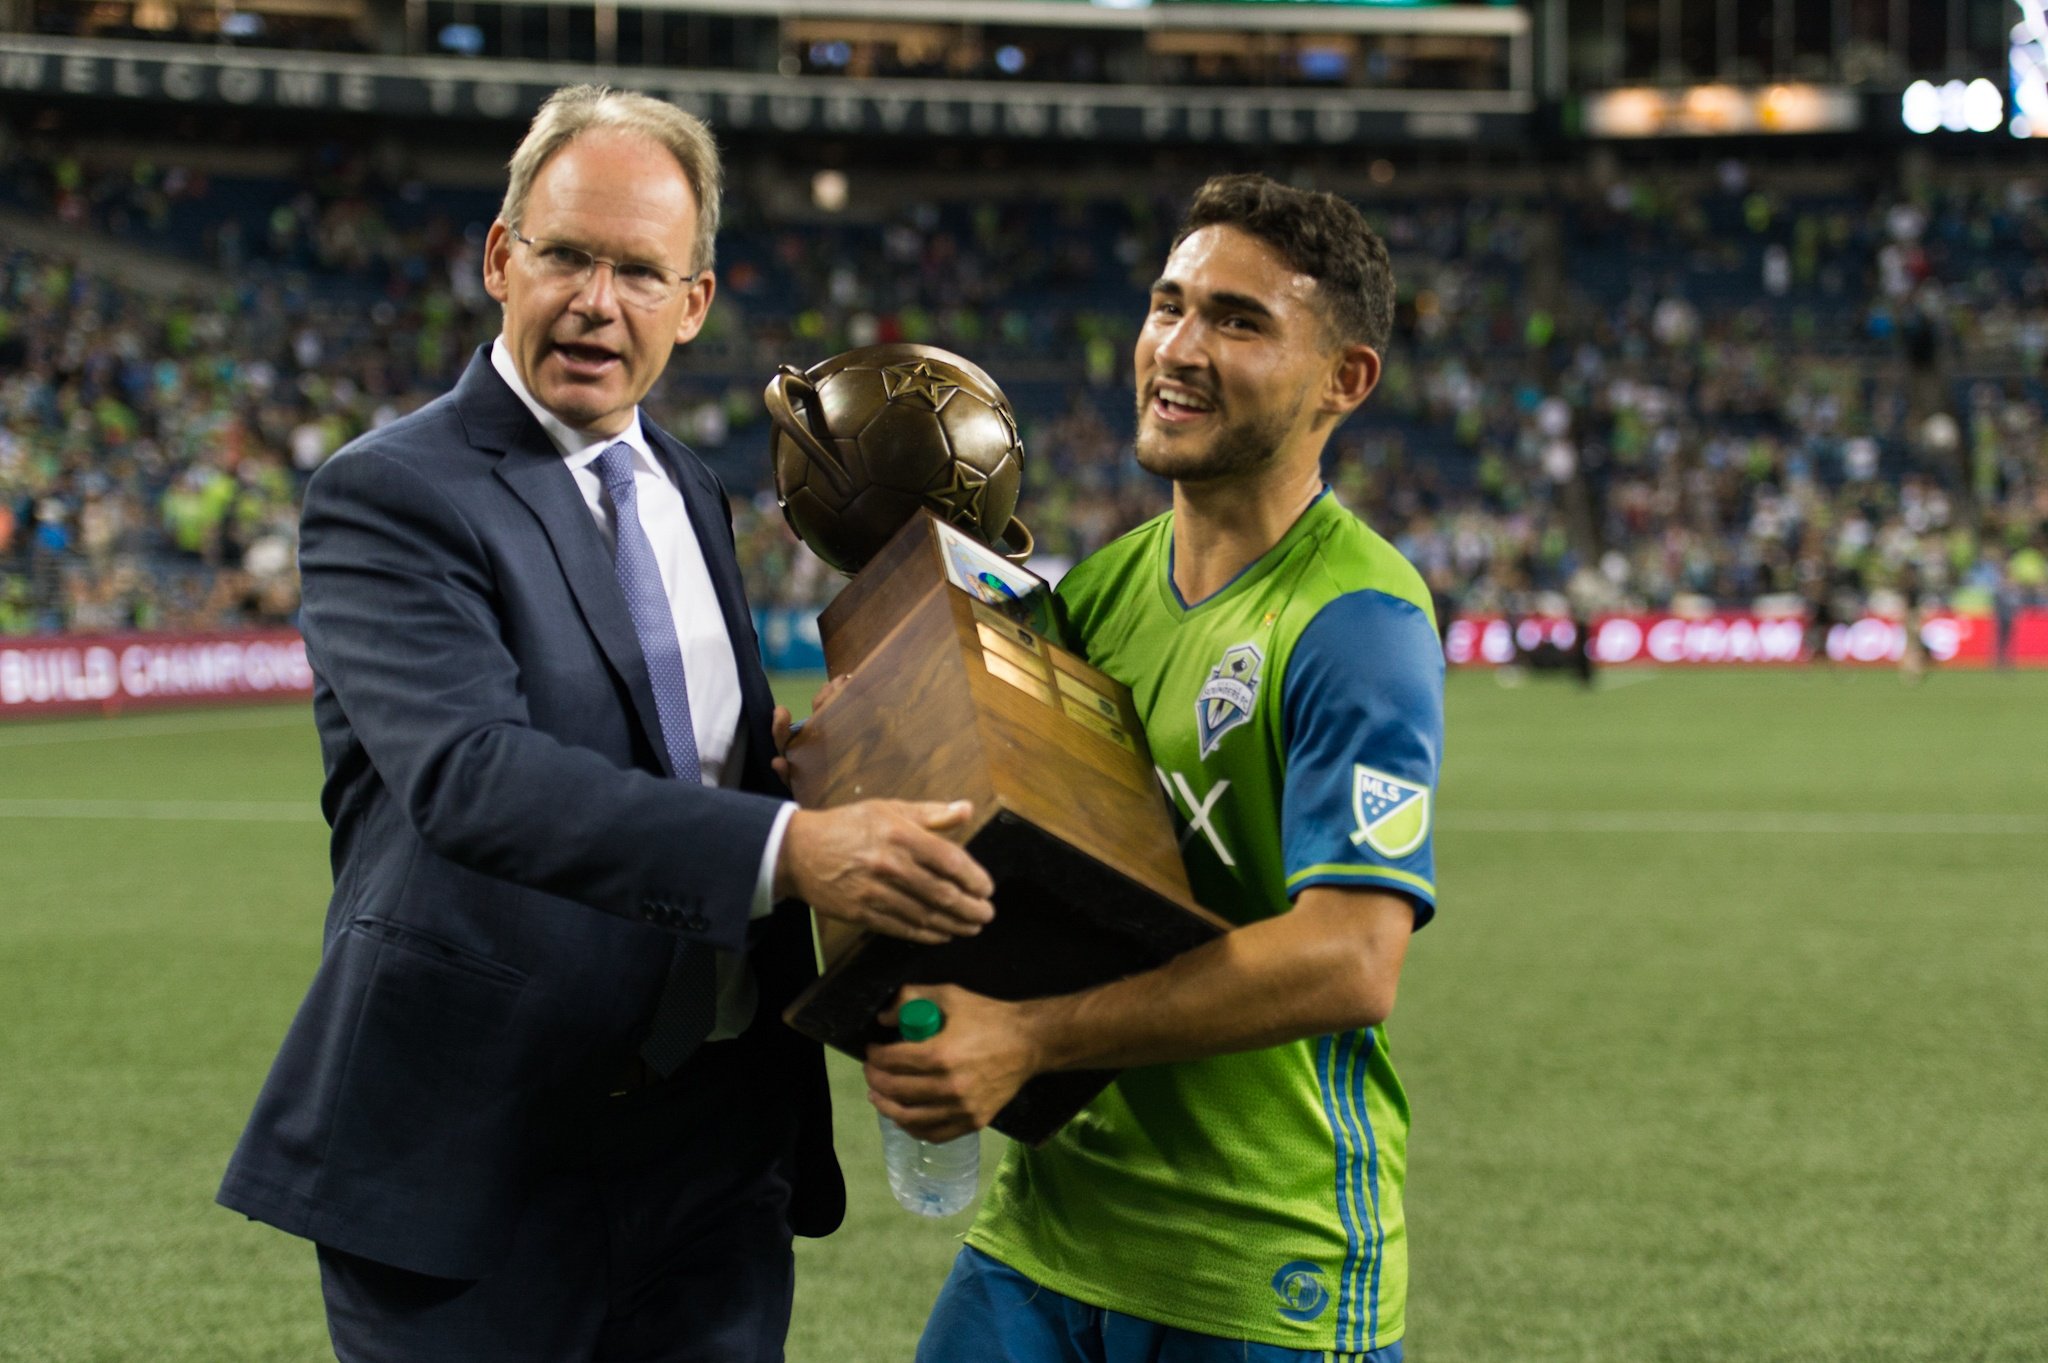 Seattle Sounders FC on X: "With tonight's win, your Sounders are the 2017 Heritage  Cup winners! #SEAvSJ https://t.co/FIH3ZsE7Up" / X